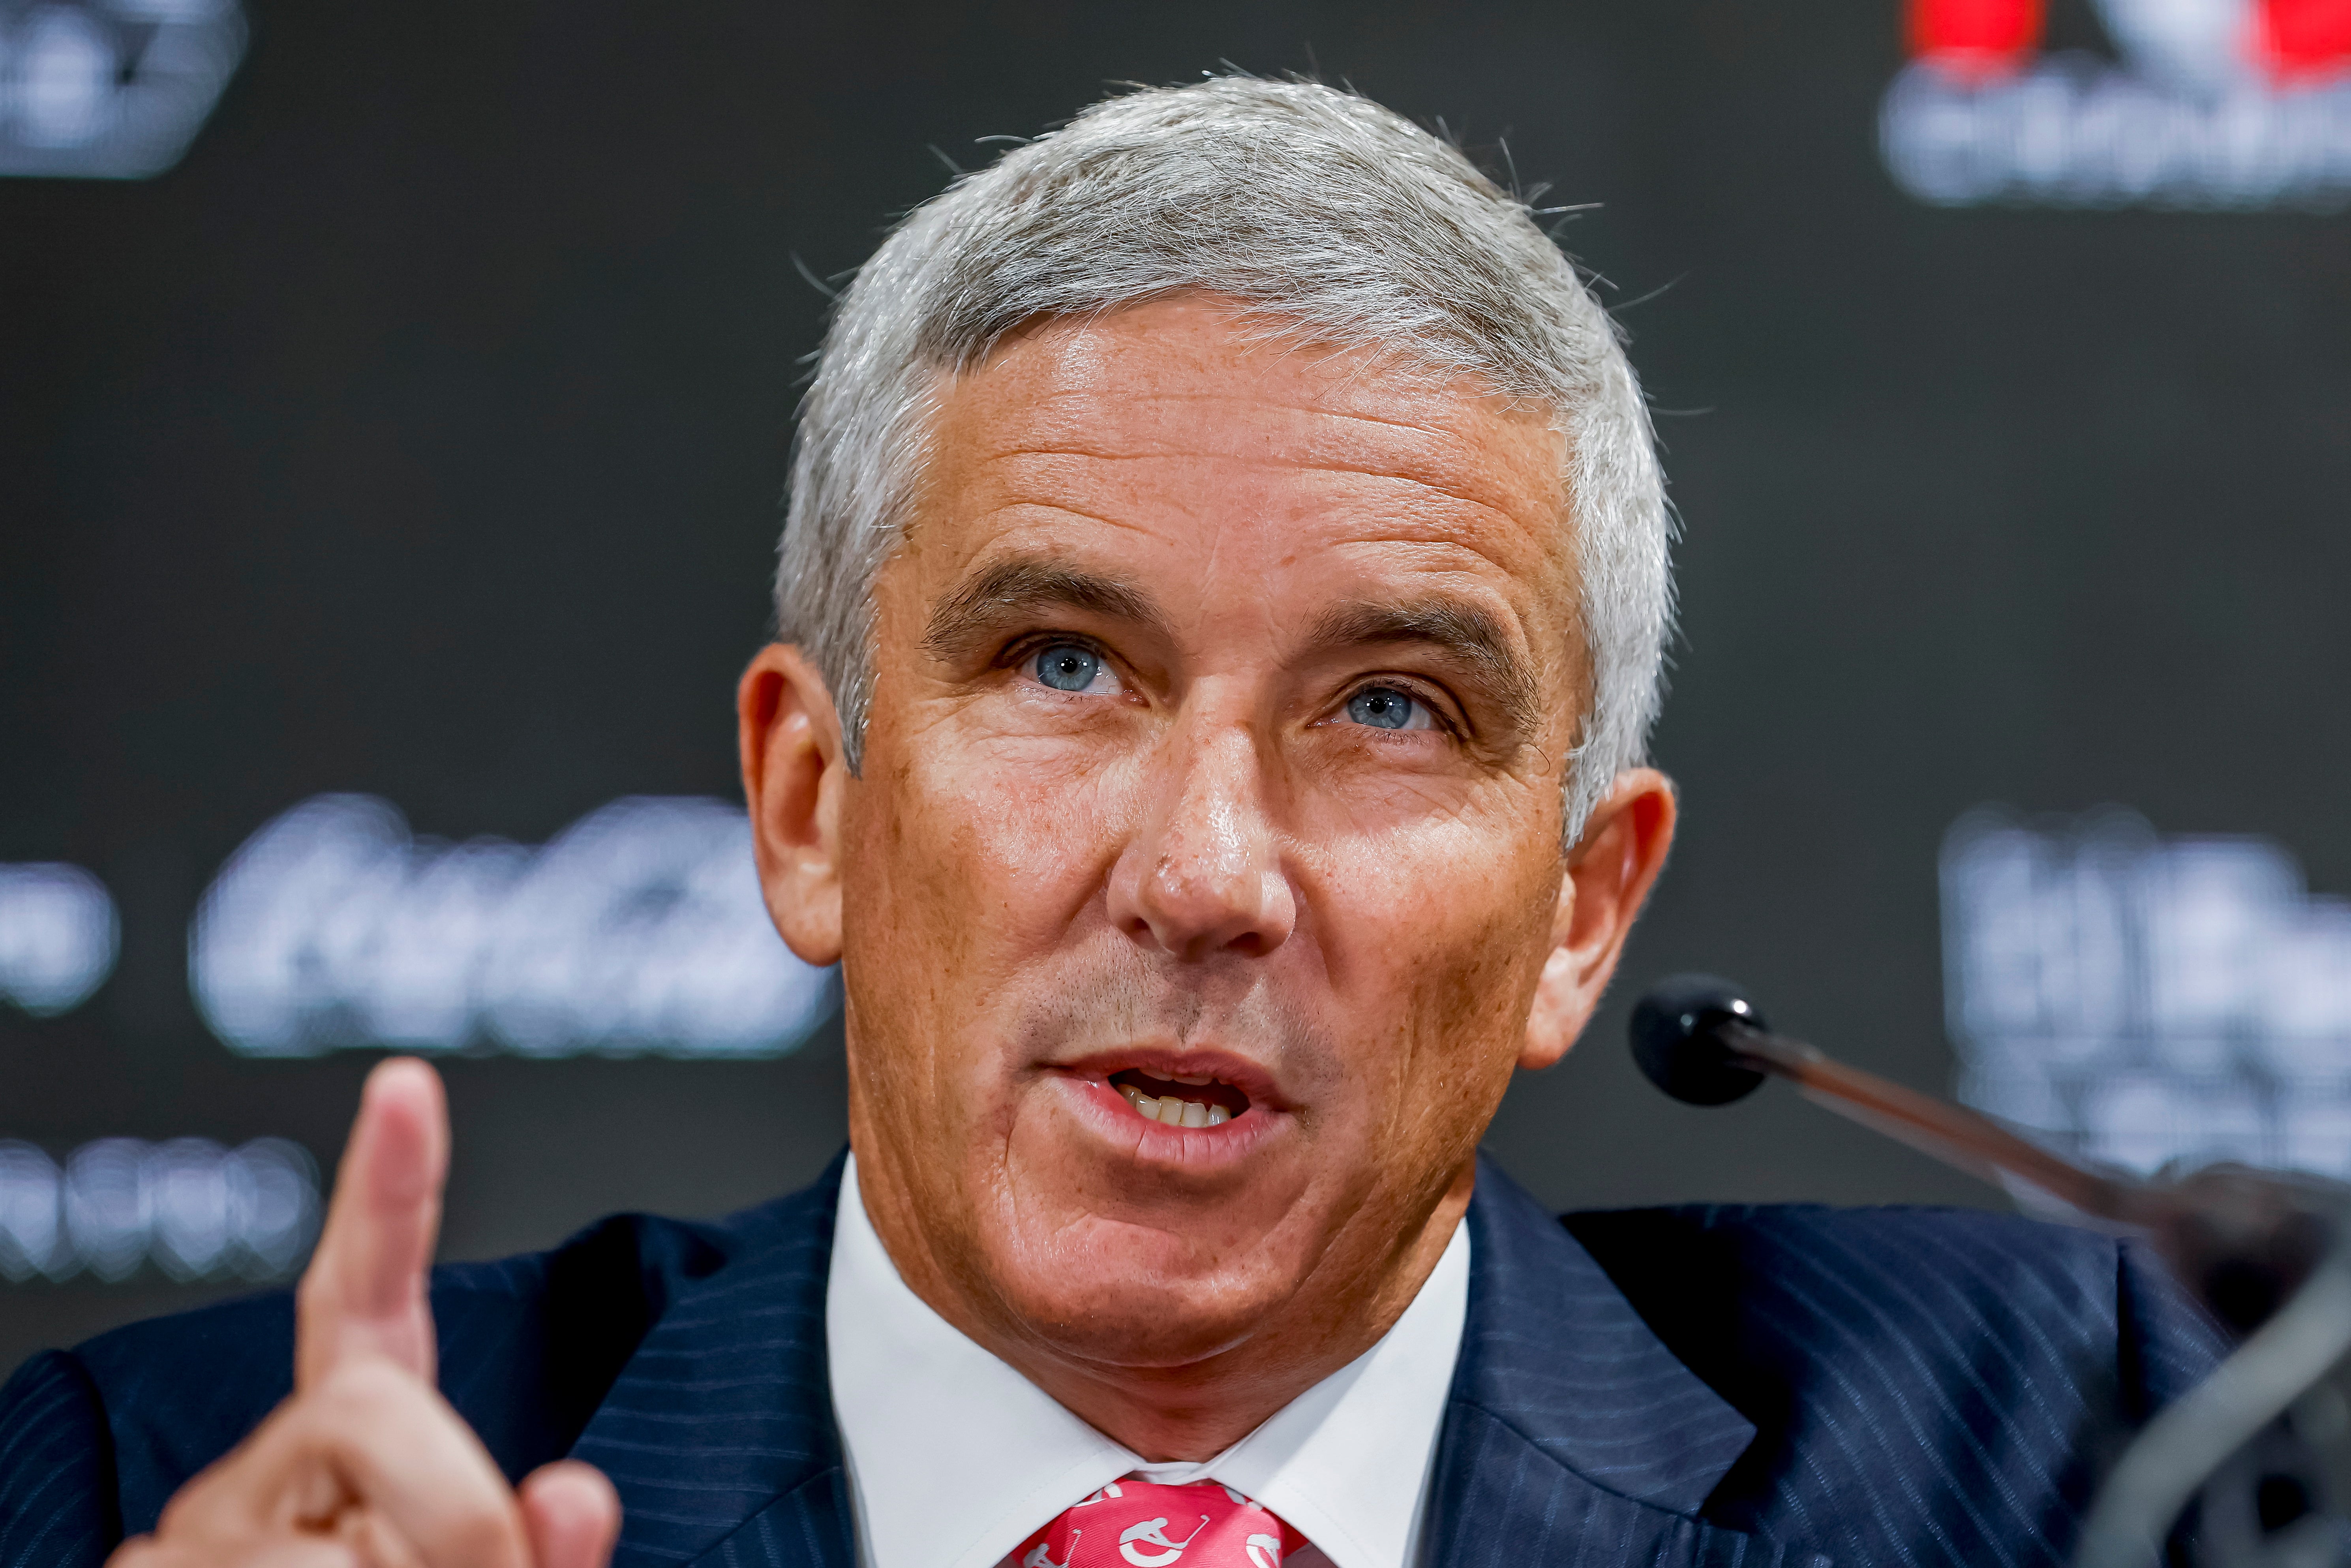 PGA commissioner Jay Monahan has come under fire